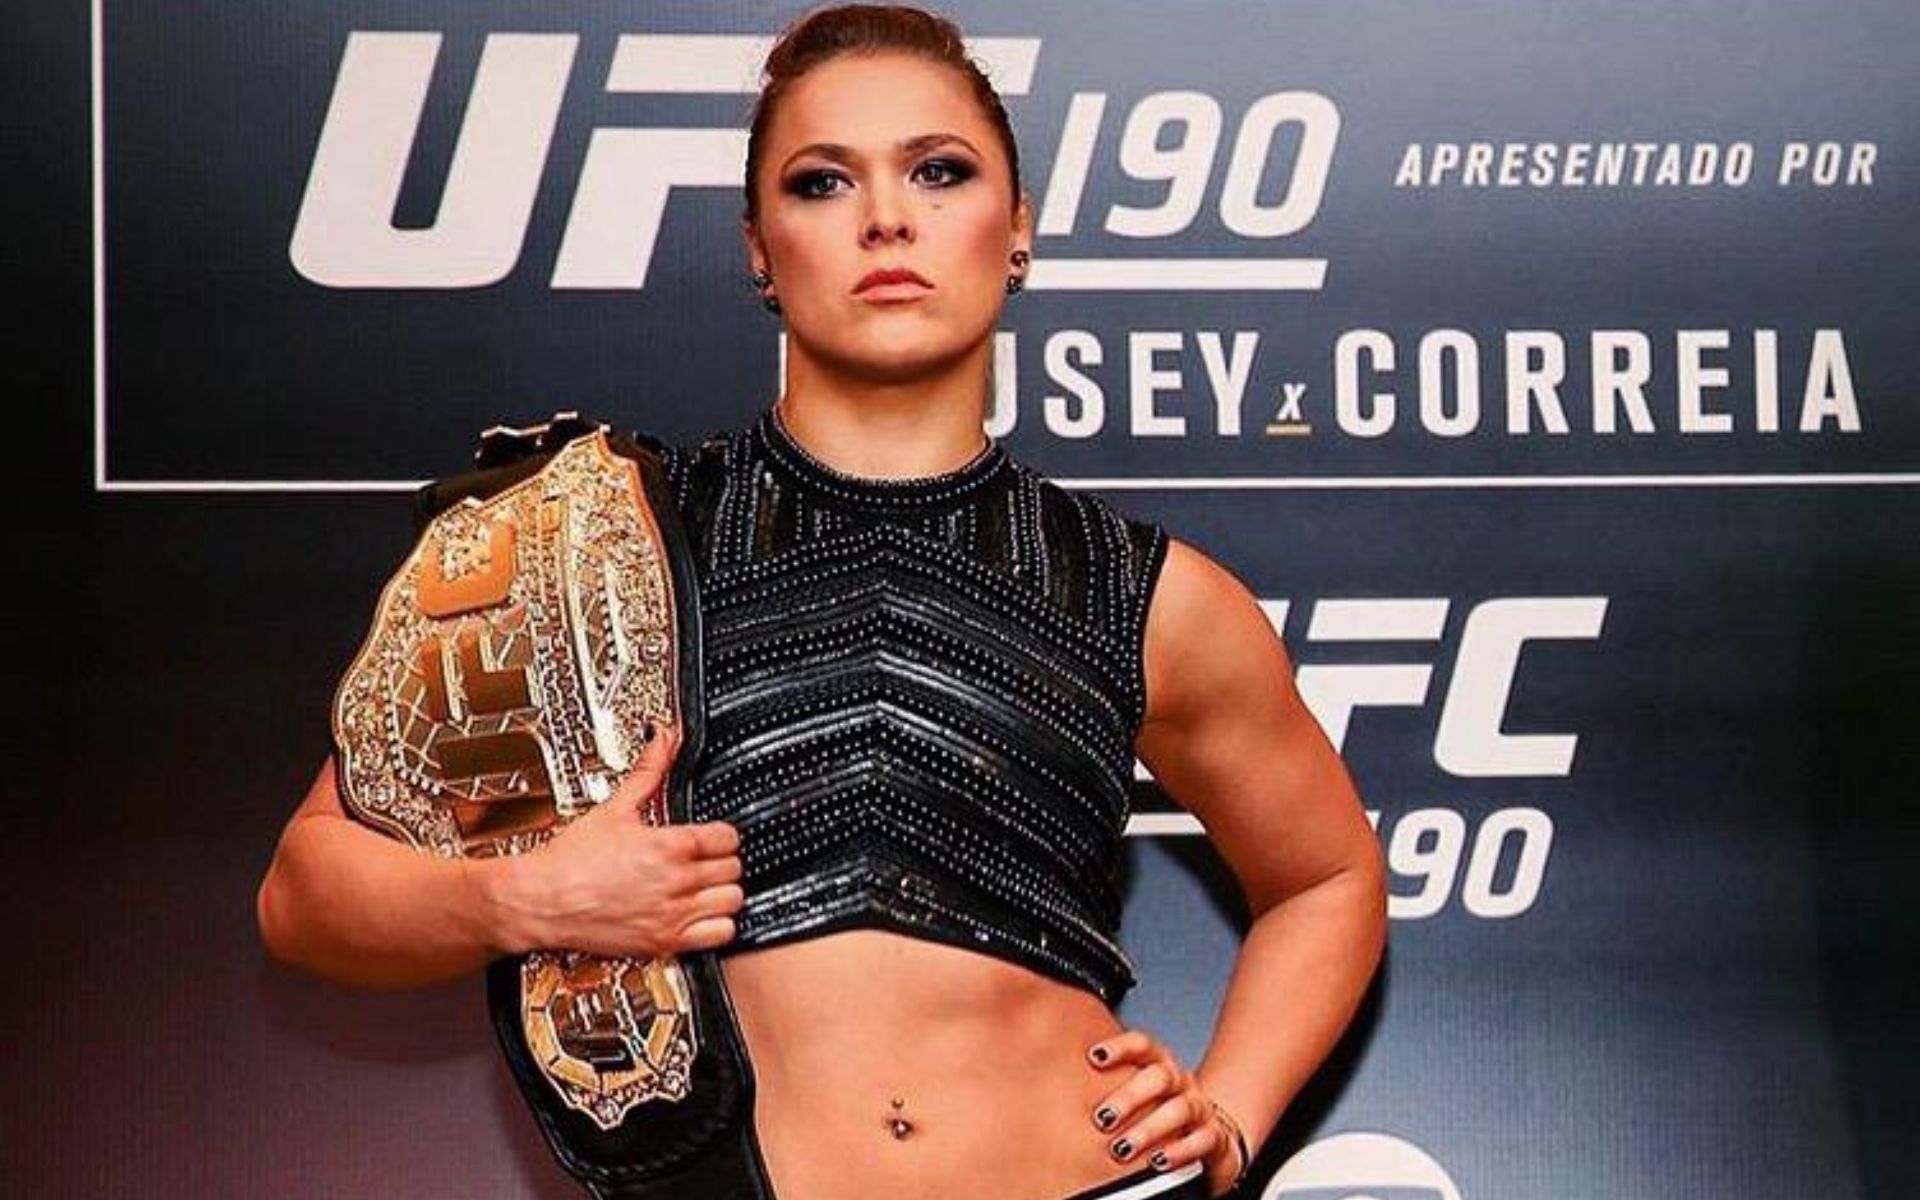 Could Ronda Rousey succeed in the modern UFC?